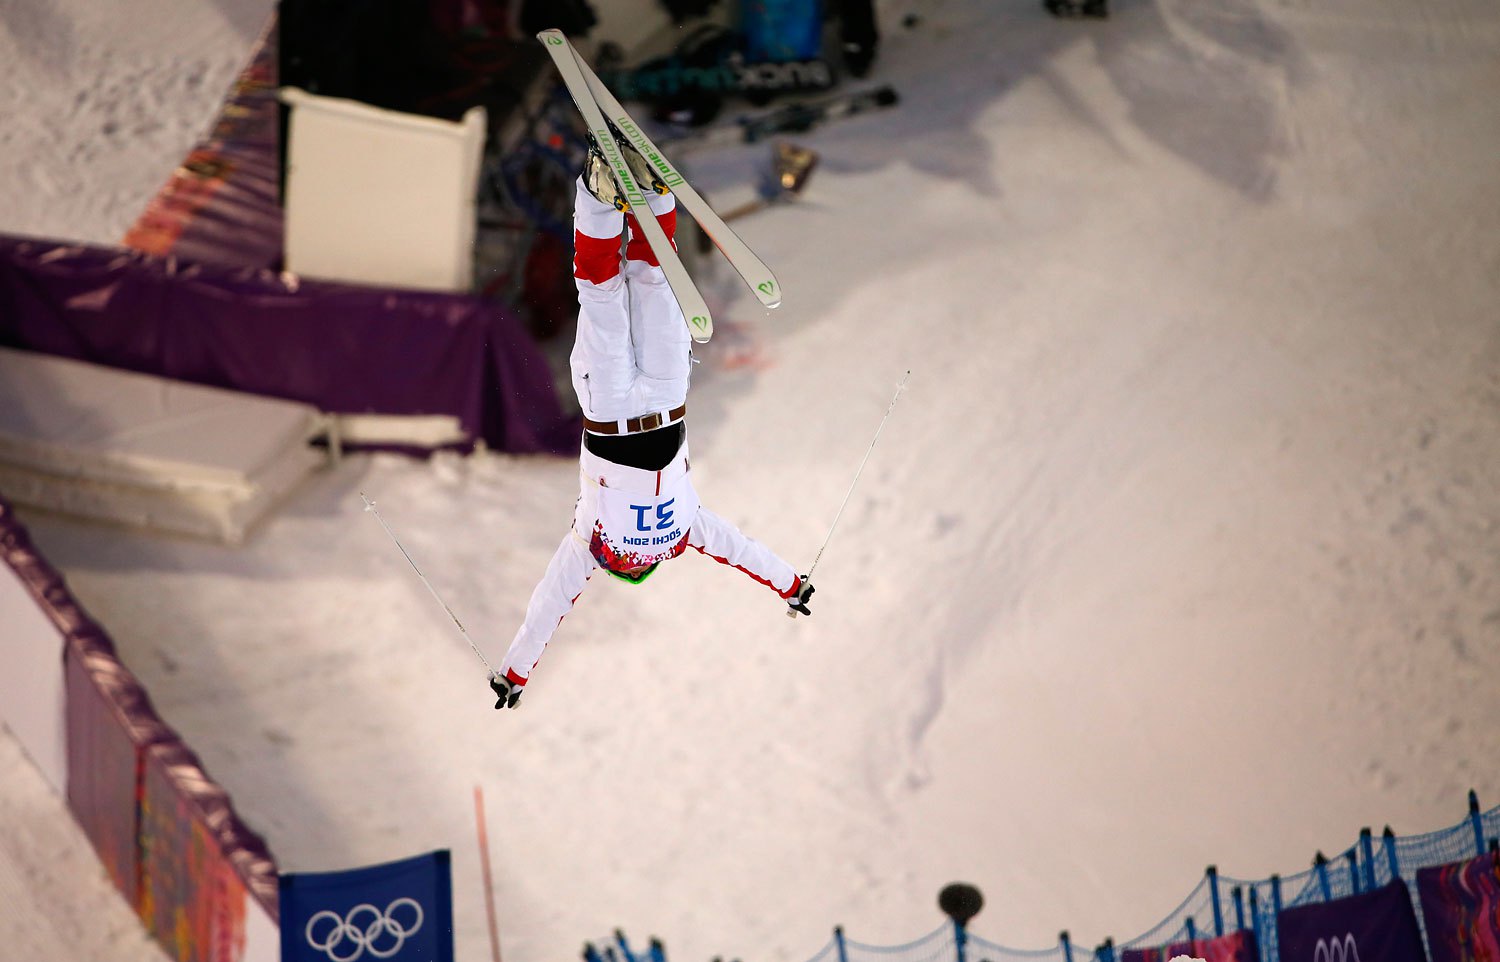 China's Qin Ning performs a jump during the women's freestyle skiing moguls qualification round in Rosa Khutor, Feb. 8, 2014.